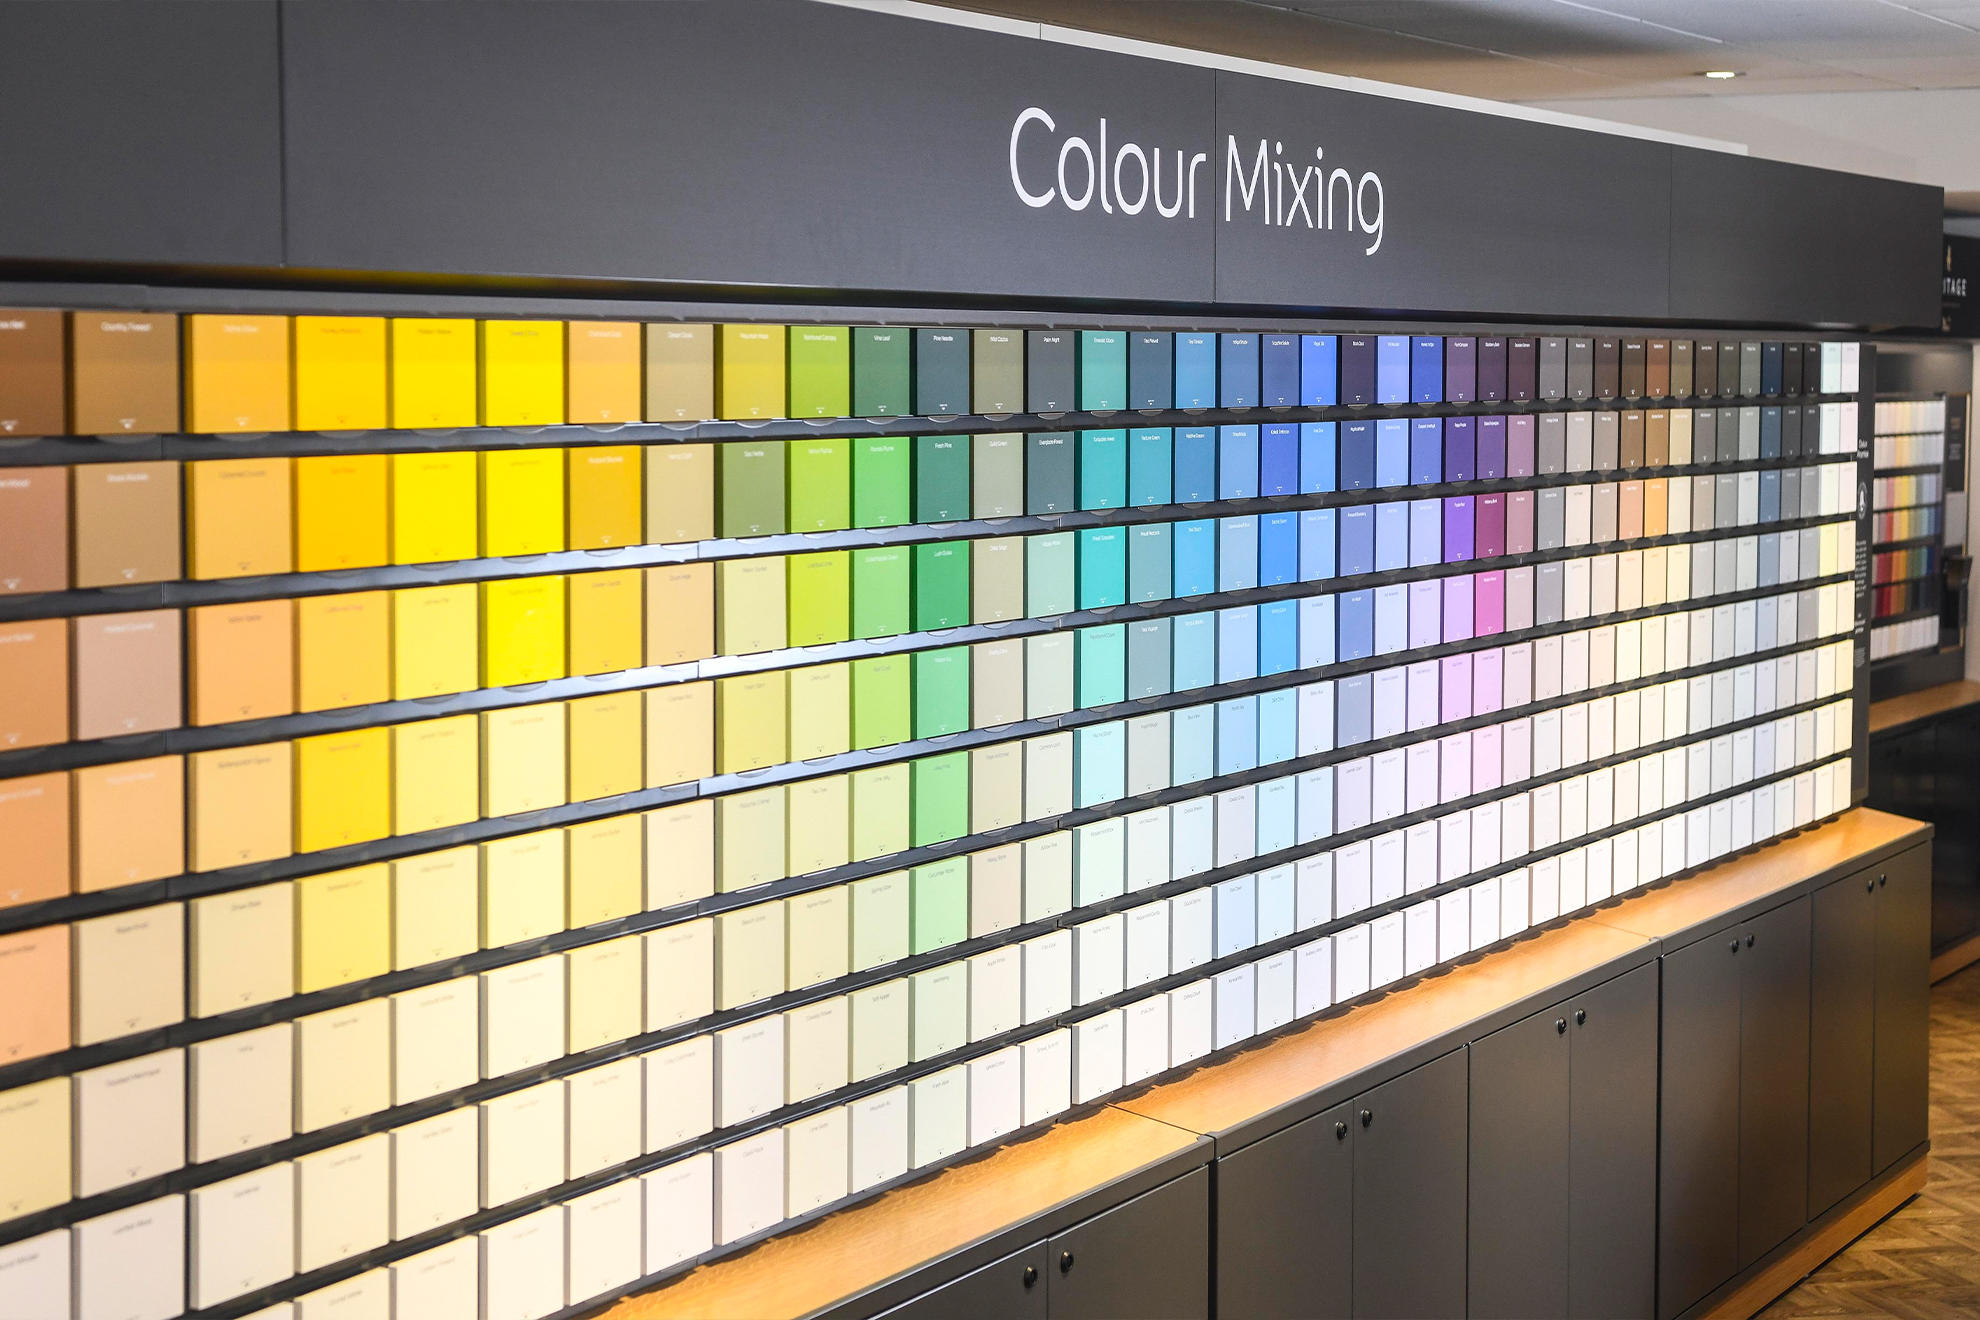 A colour mixing wall at a Homebase store. Square colour chips are hung on a wall show a variety of shades from light to dark.